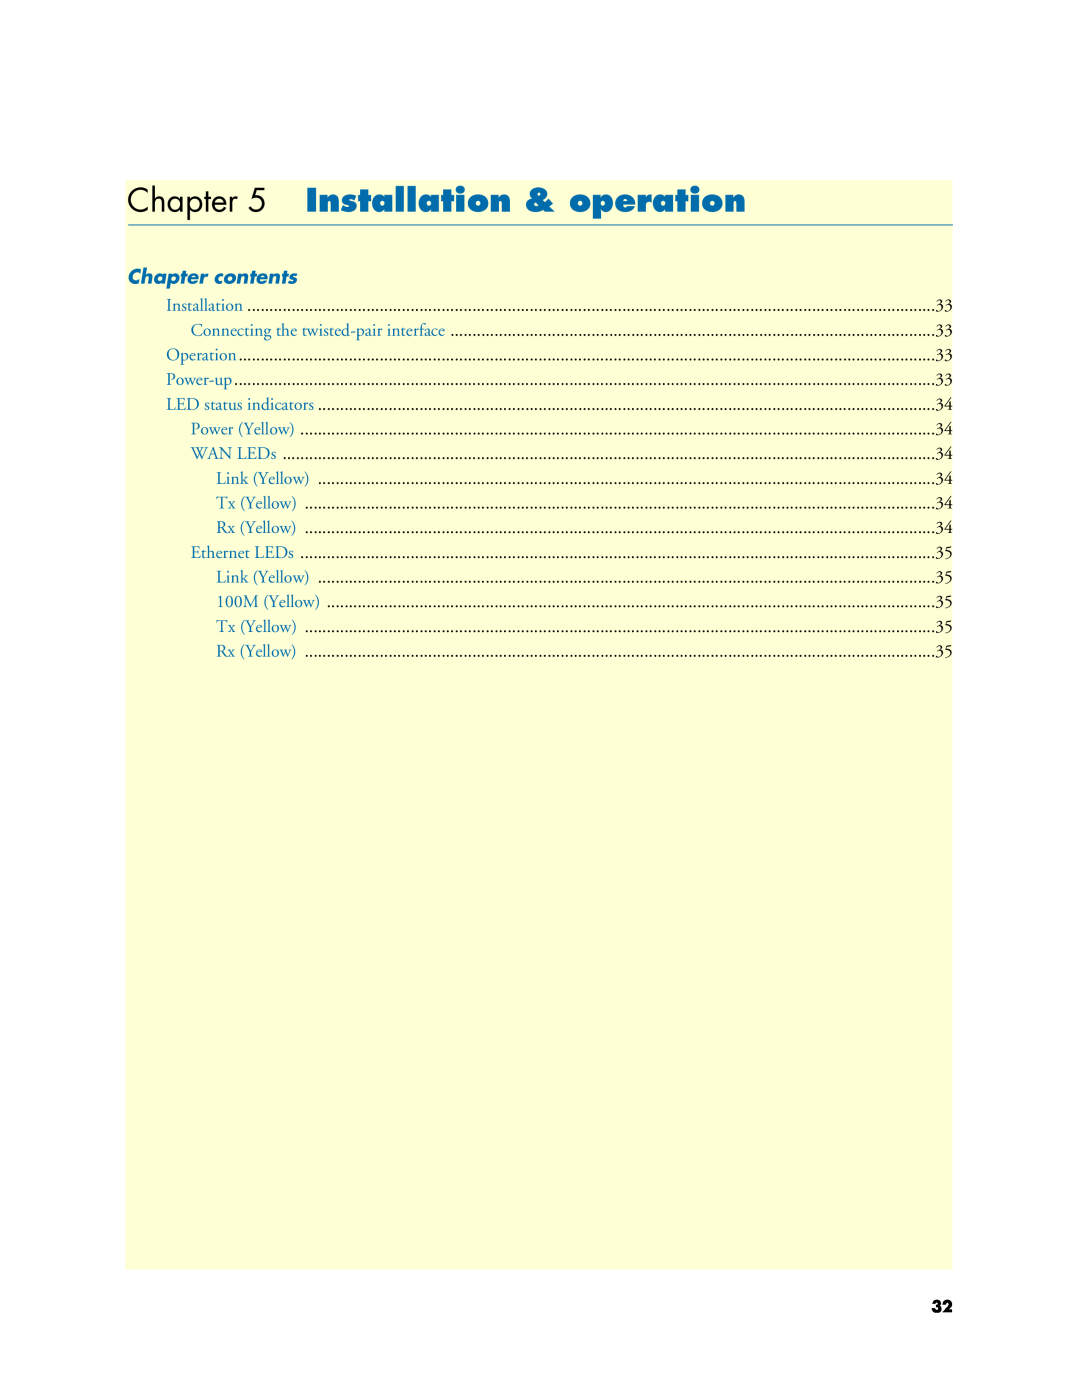 Patton electronic Model 3088/I manual Installation & operation, Chapter contents 